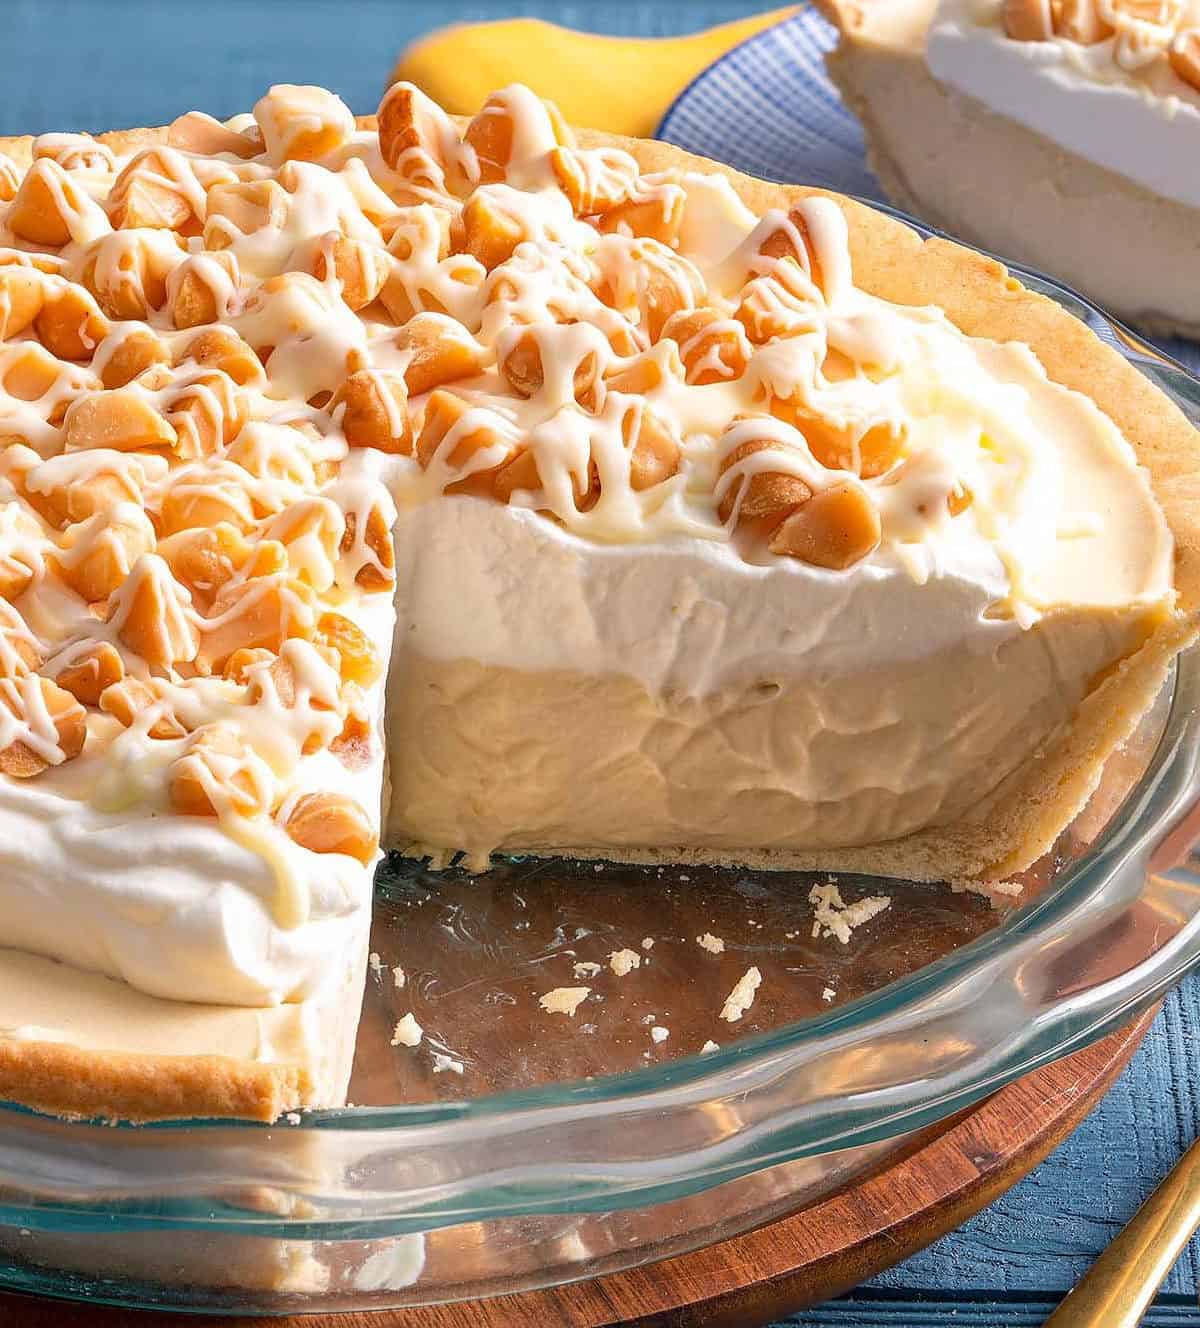  This pie will have you going nuts for more with every bite